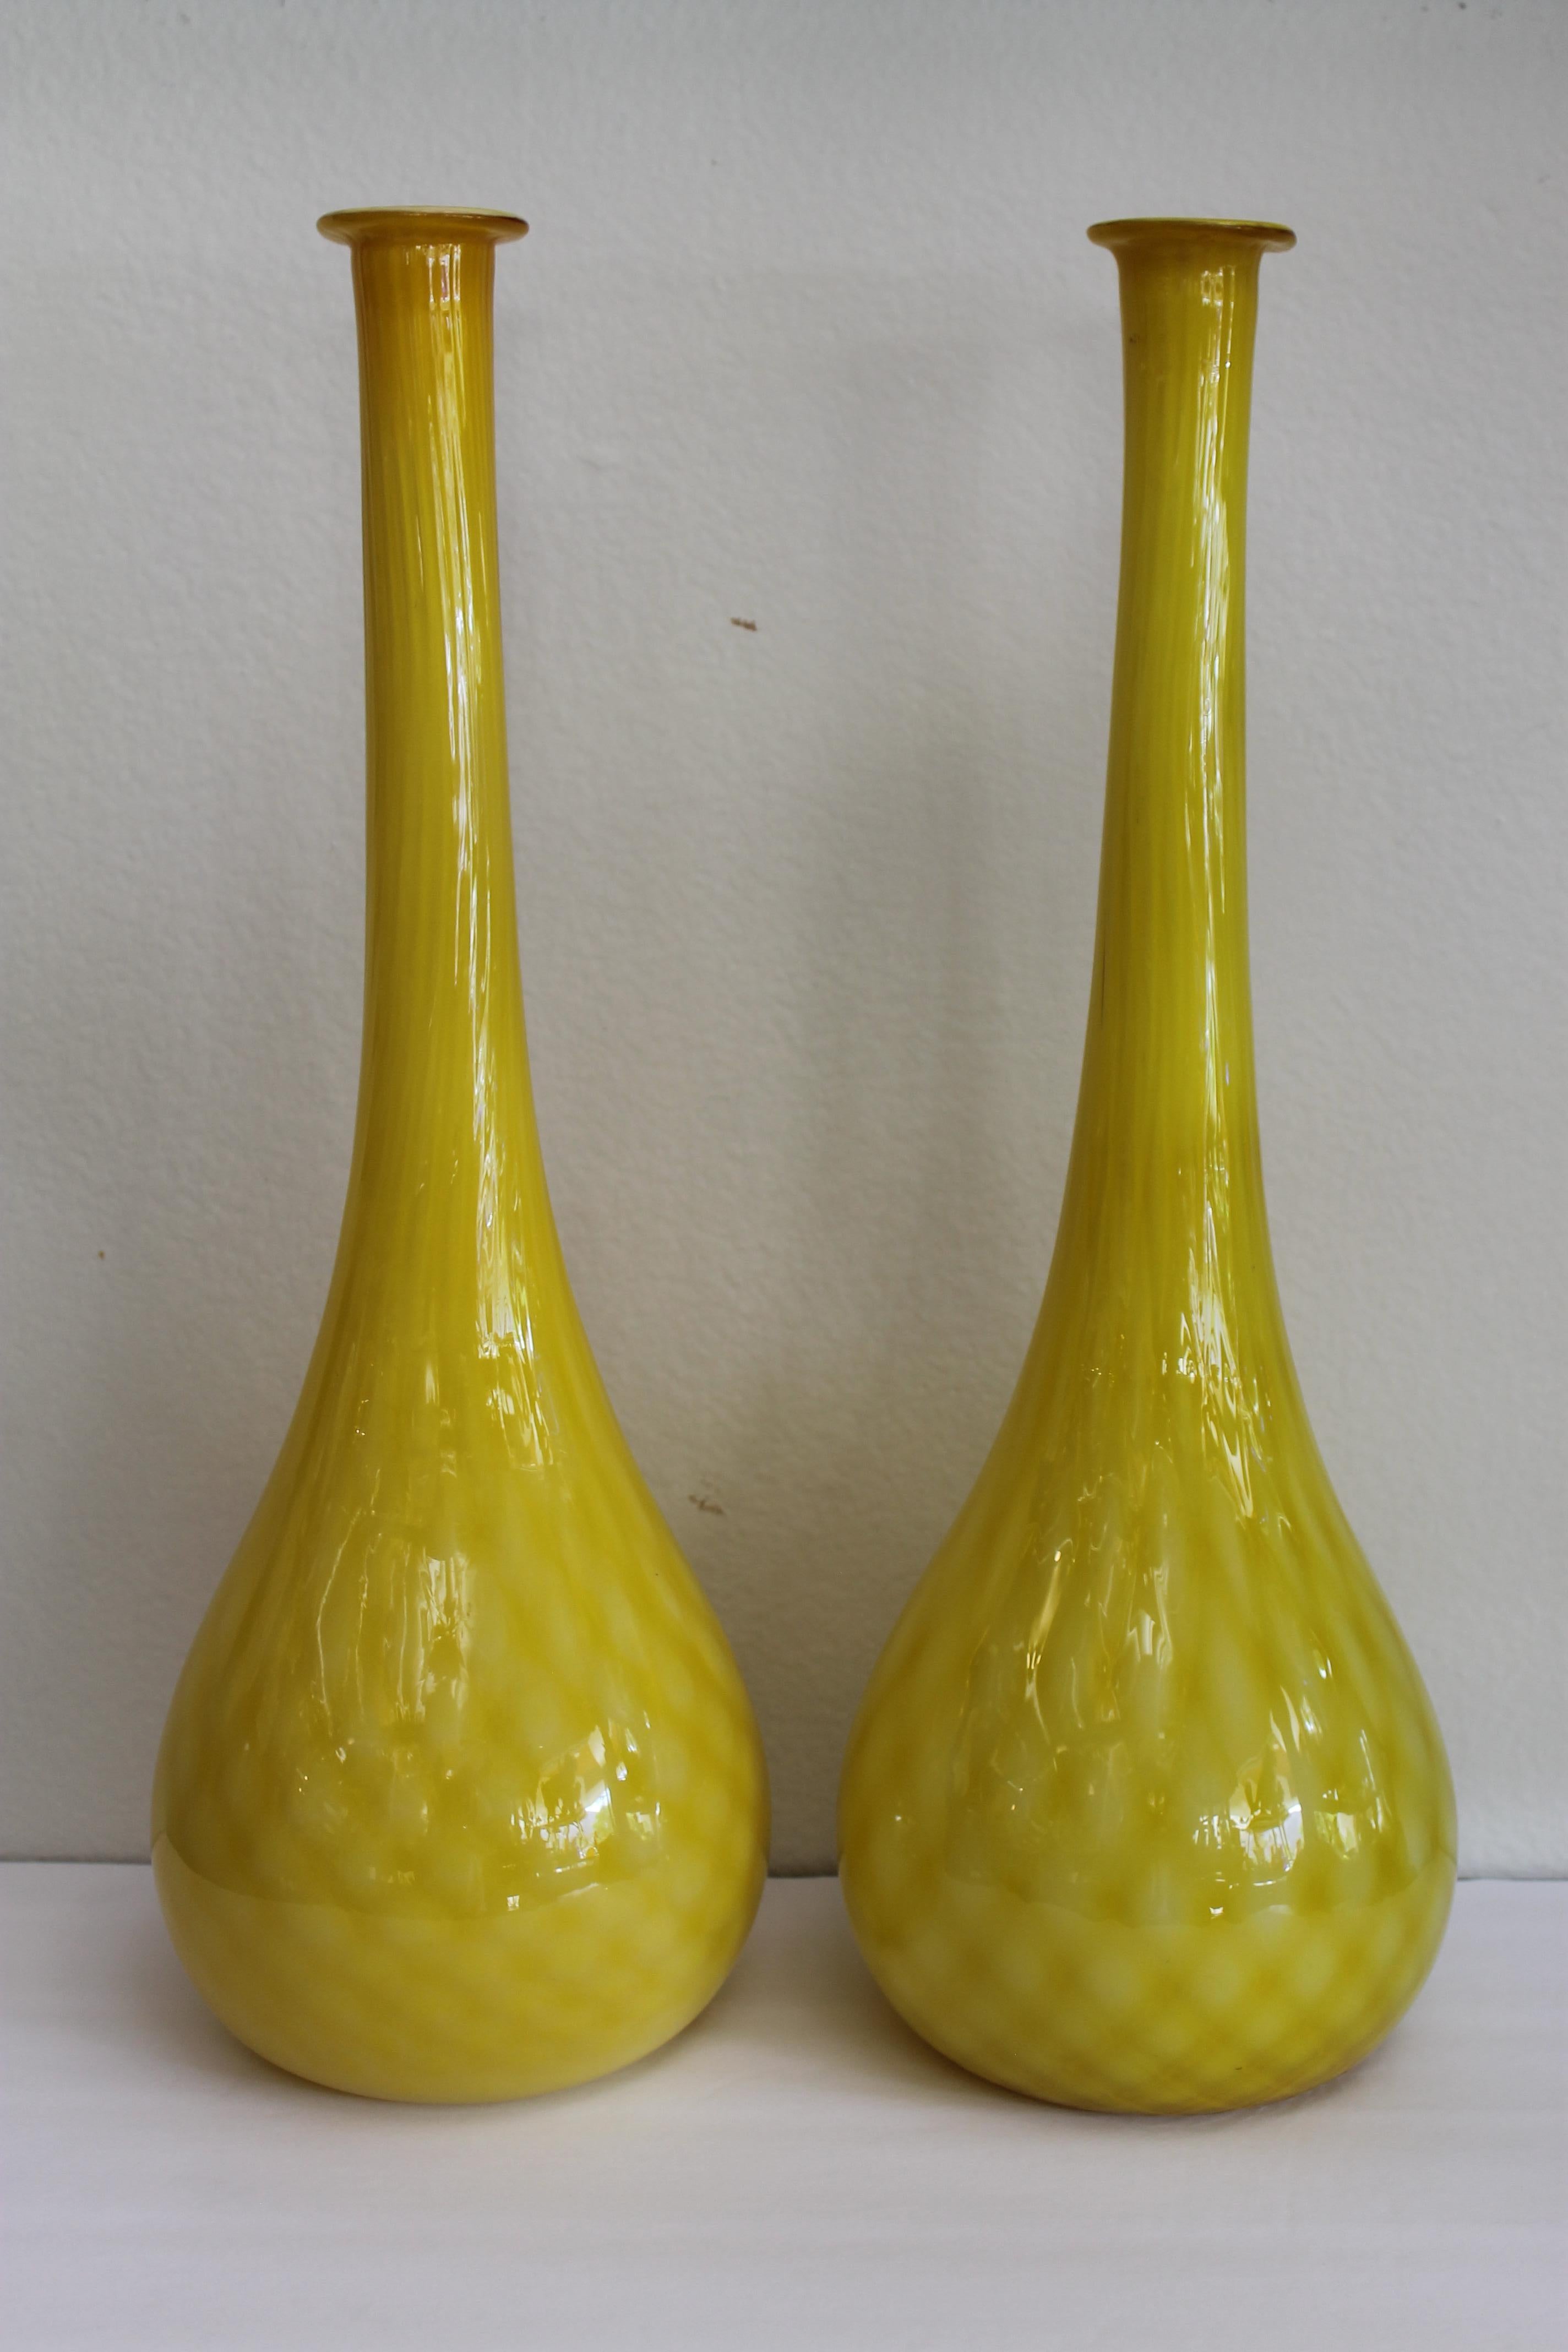 Pair of Murano cased glass yellow vases with a diamond pattern. Vases measure about 20